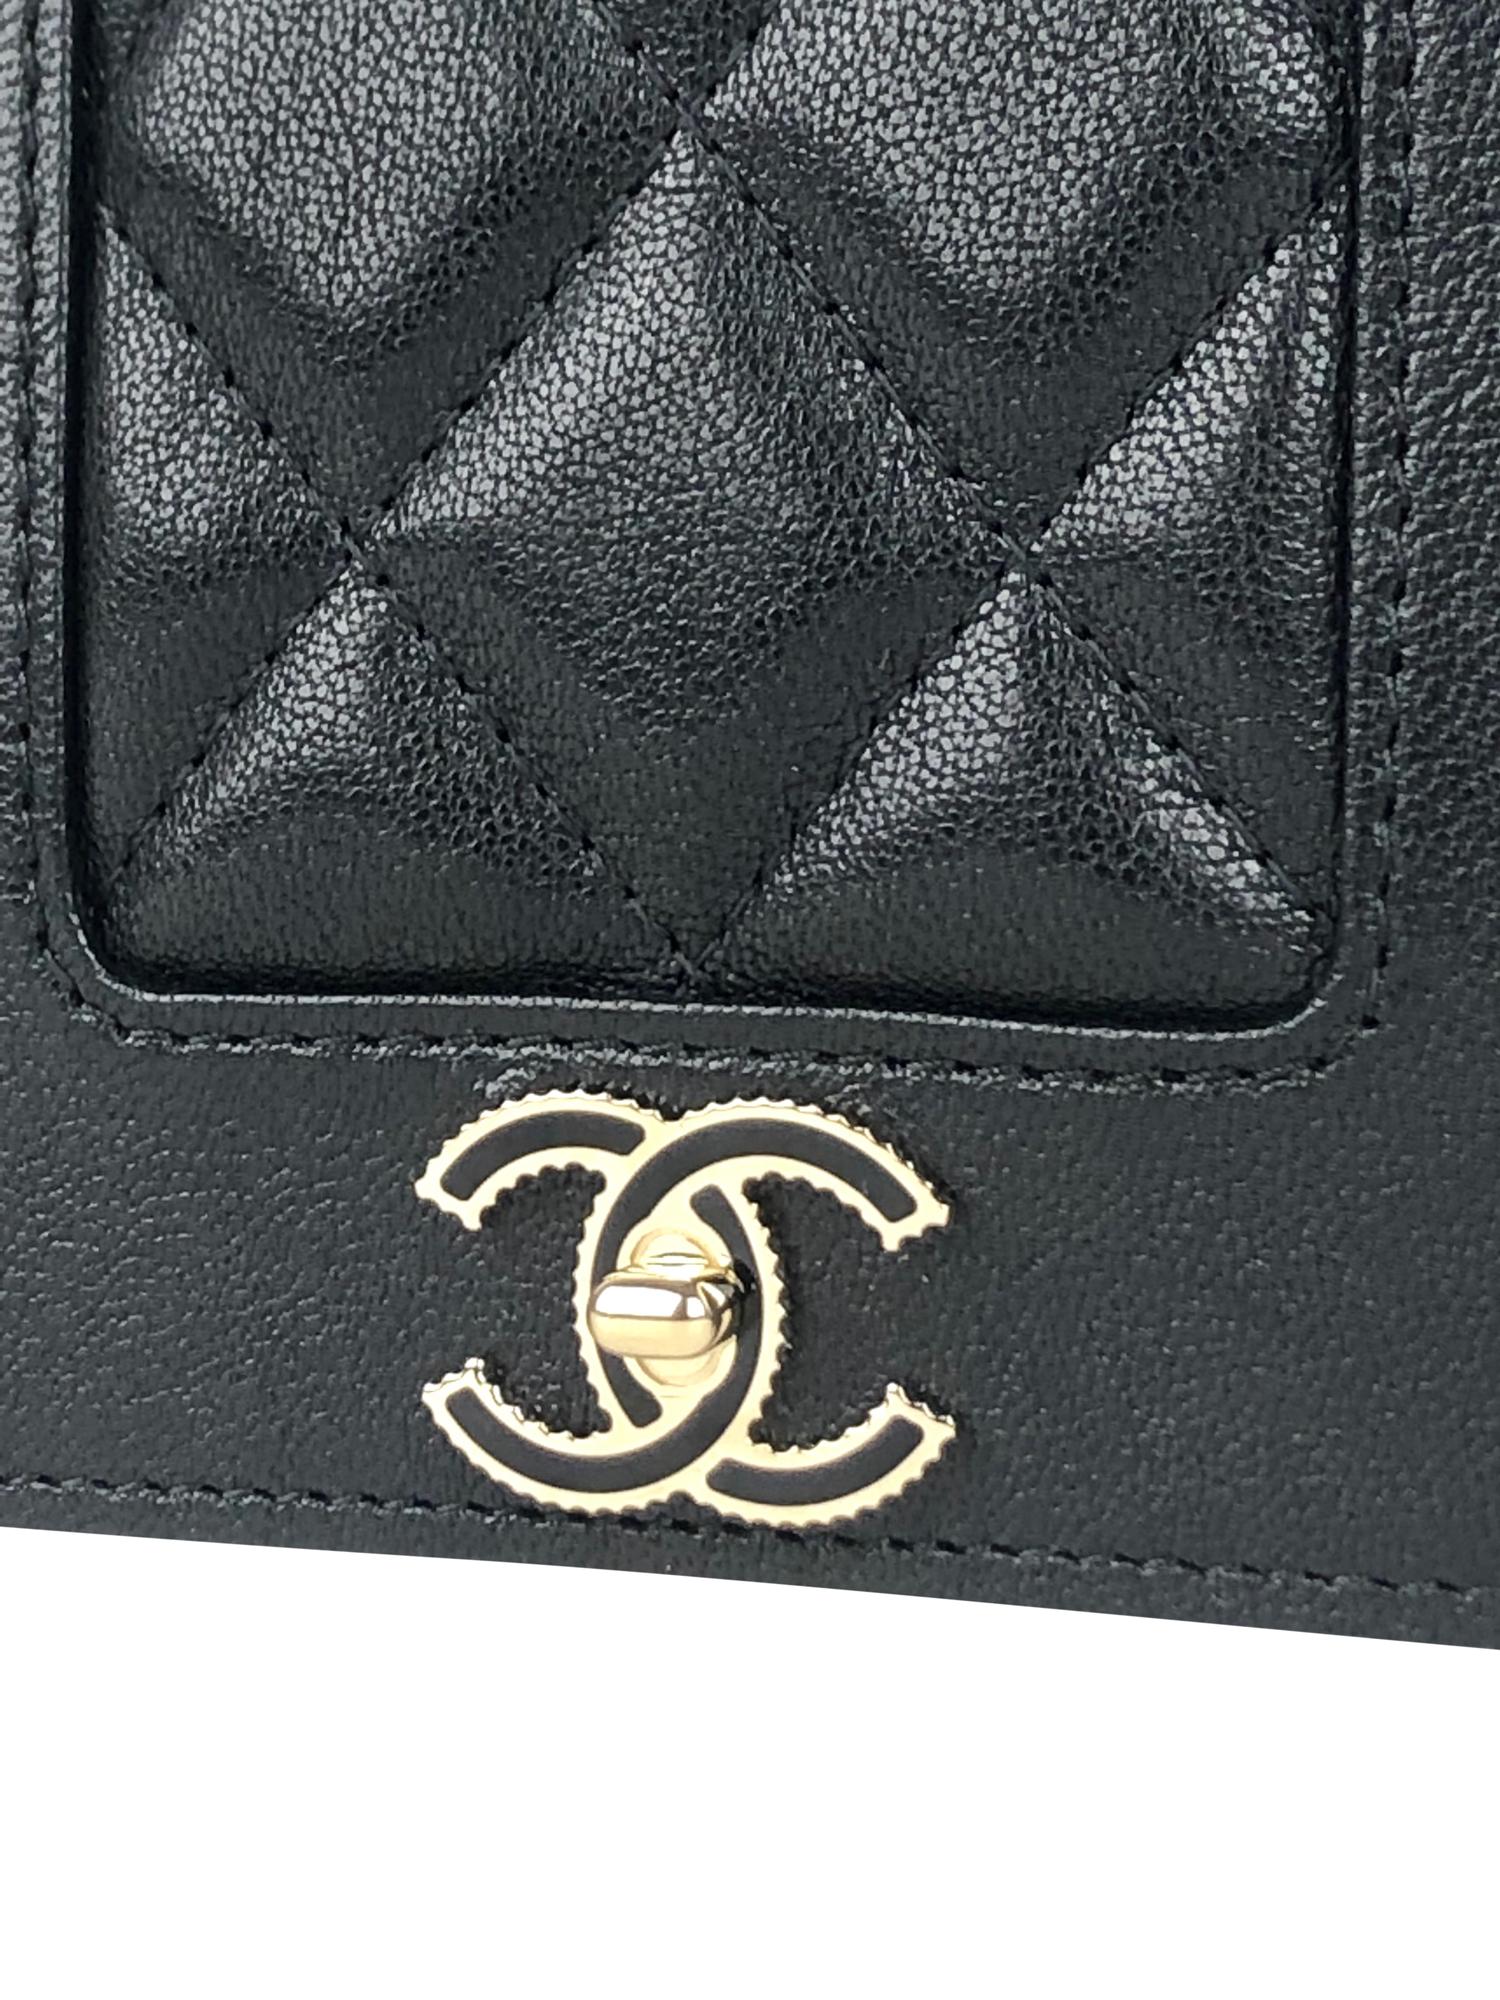 Chanel Mademoiselle Wallet on Chain Crossbody Bag For Sale 1